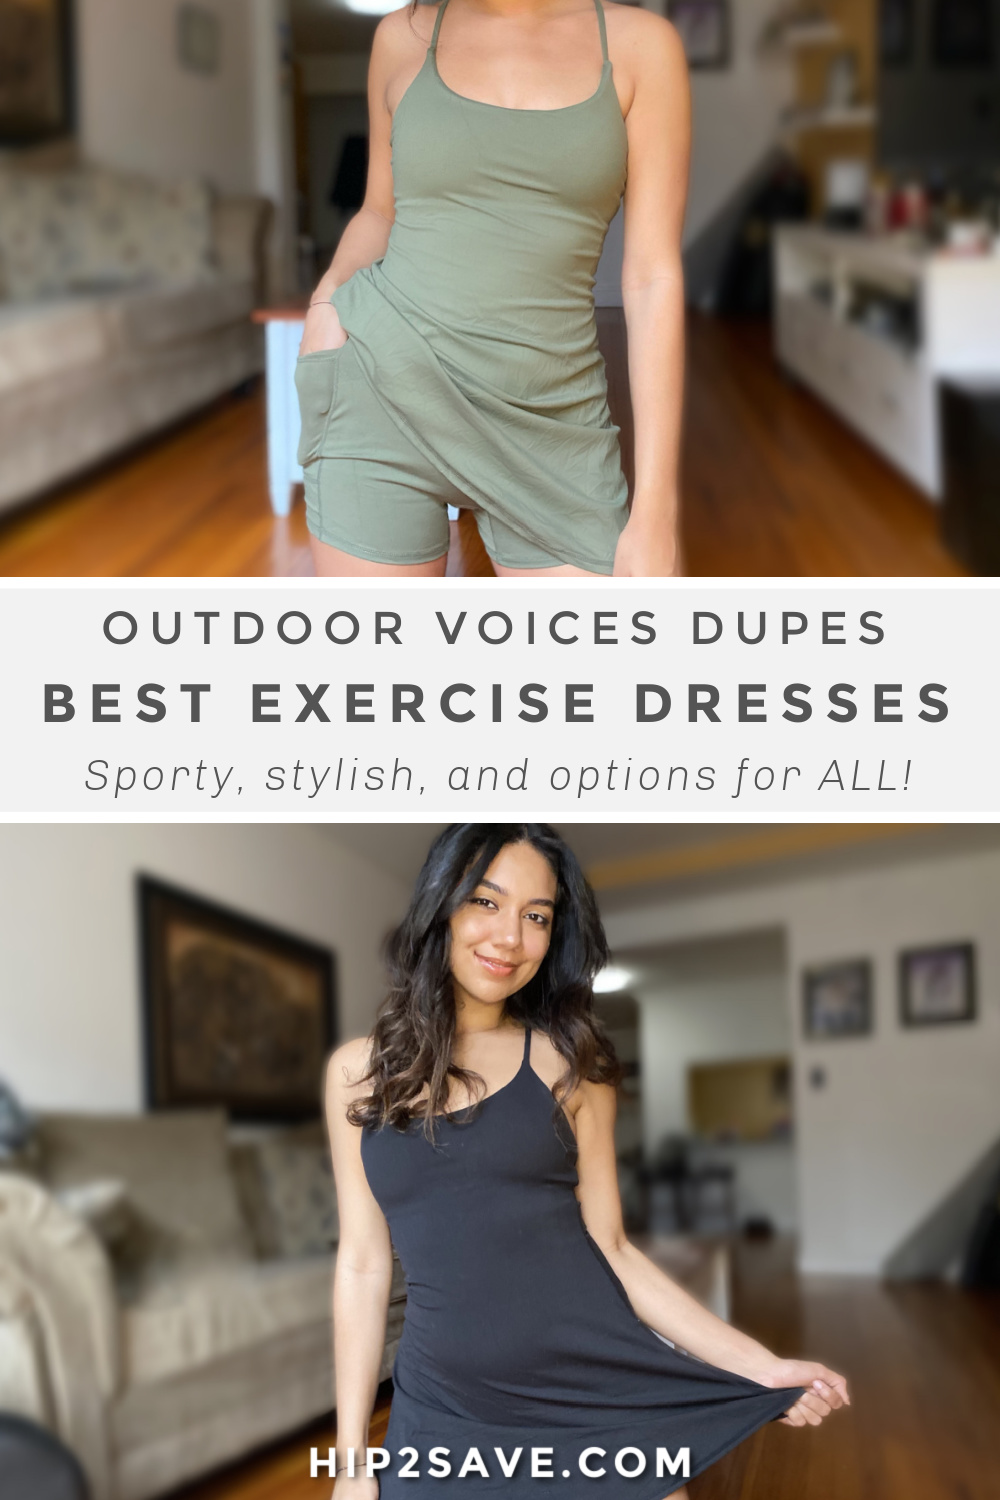 Trendy Exercise Dress Picks That Work for Any Occasion